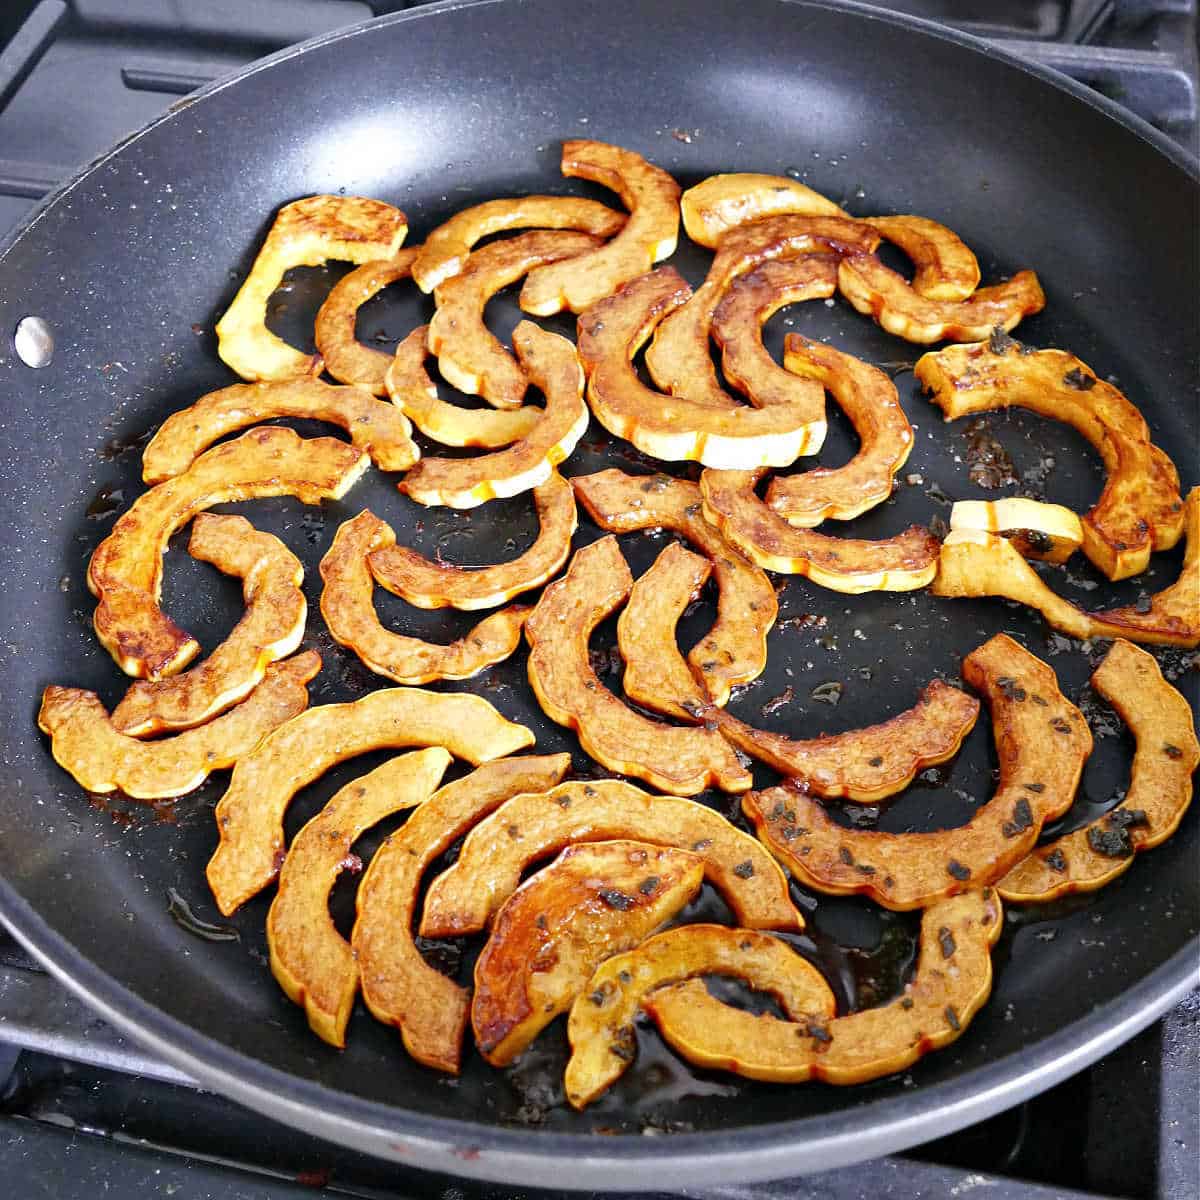 pan fried delicata squash pieces in a skillet on a stove